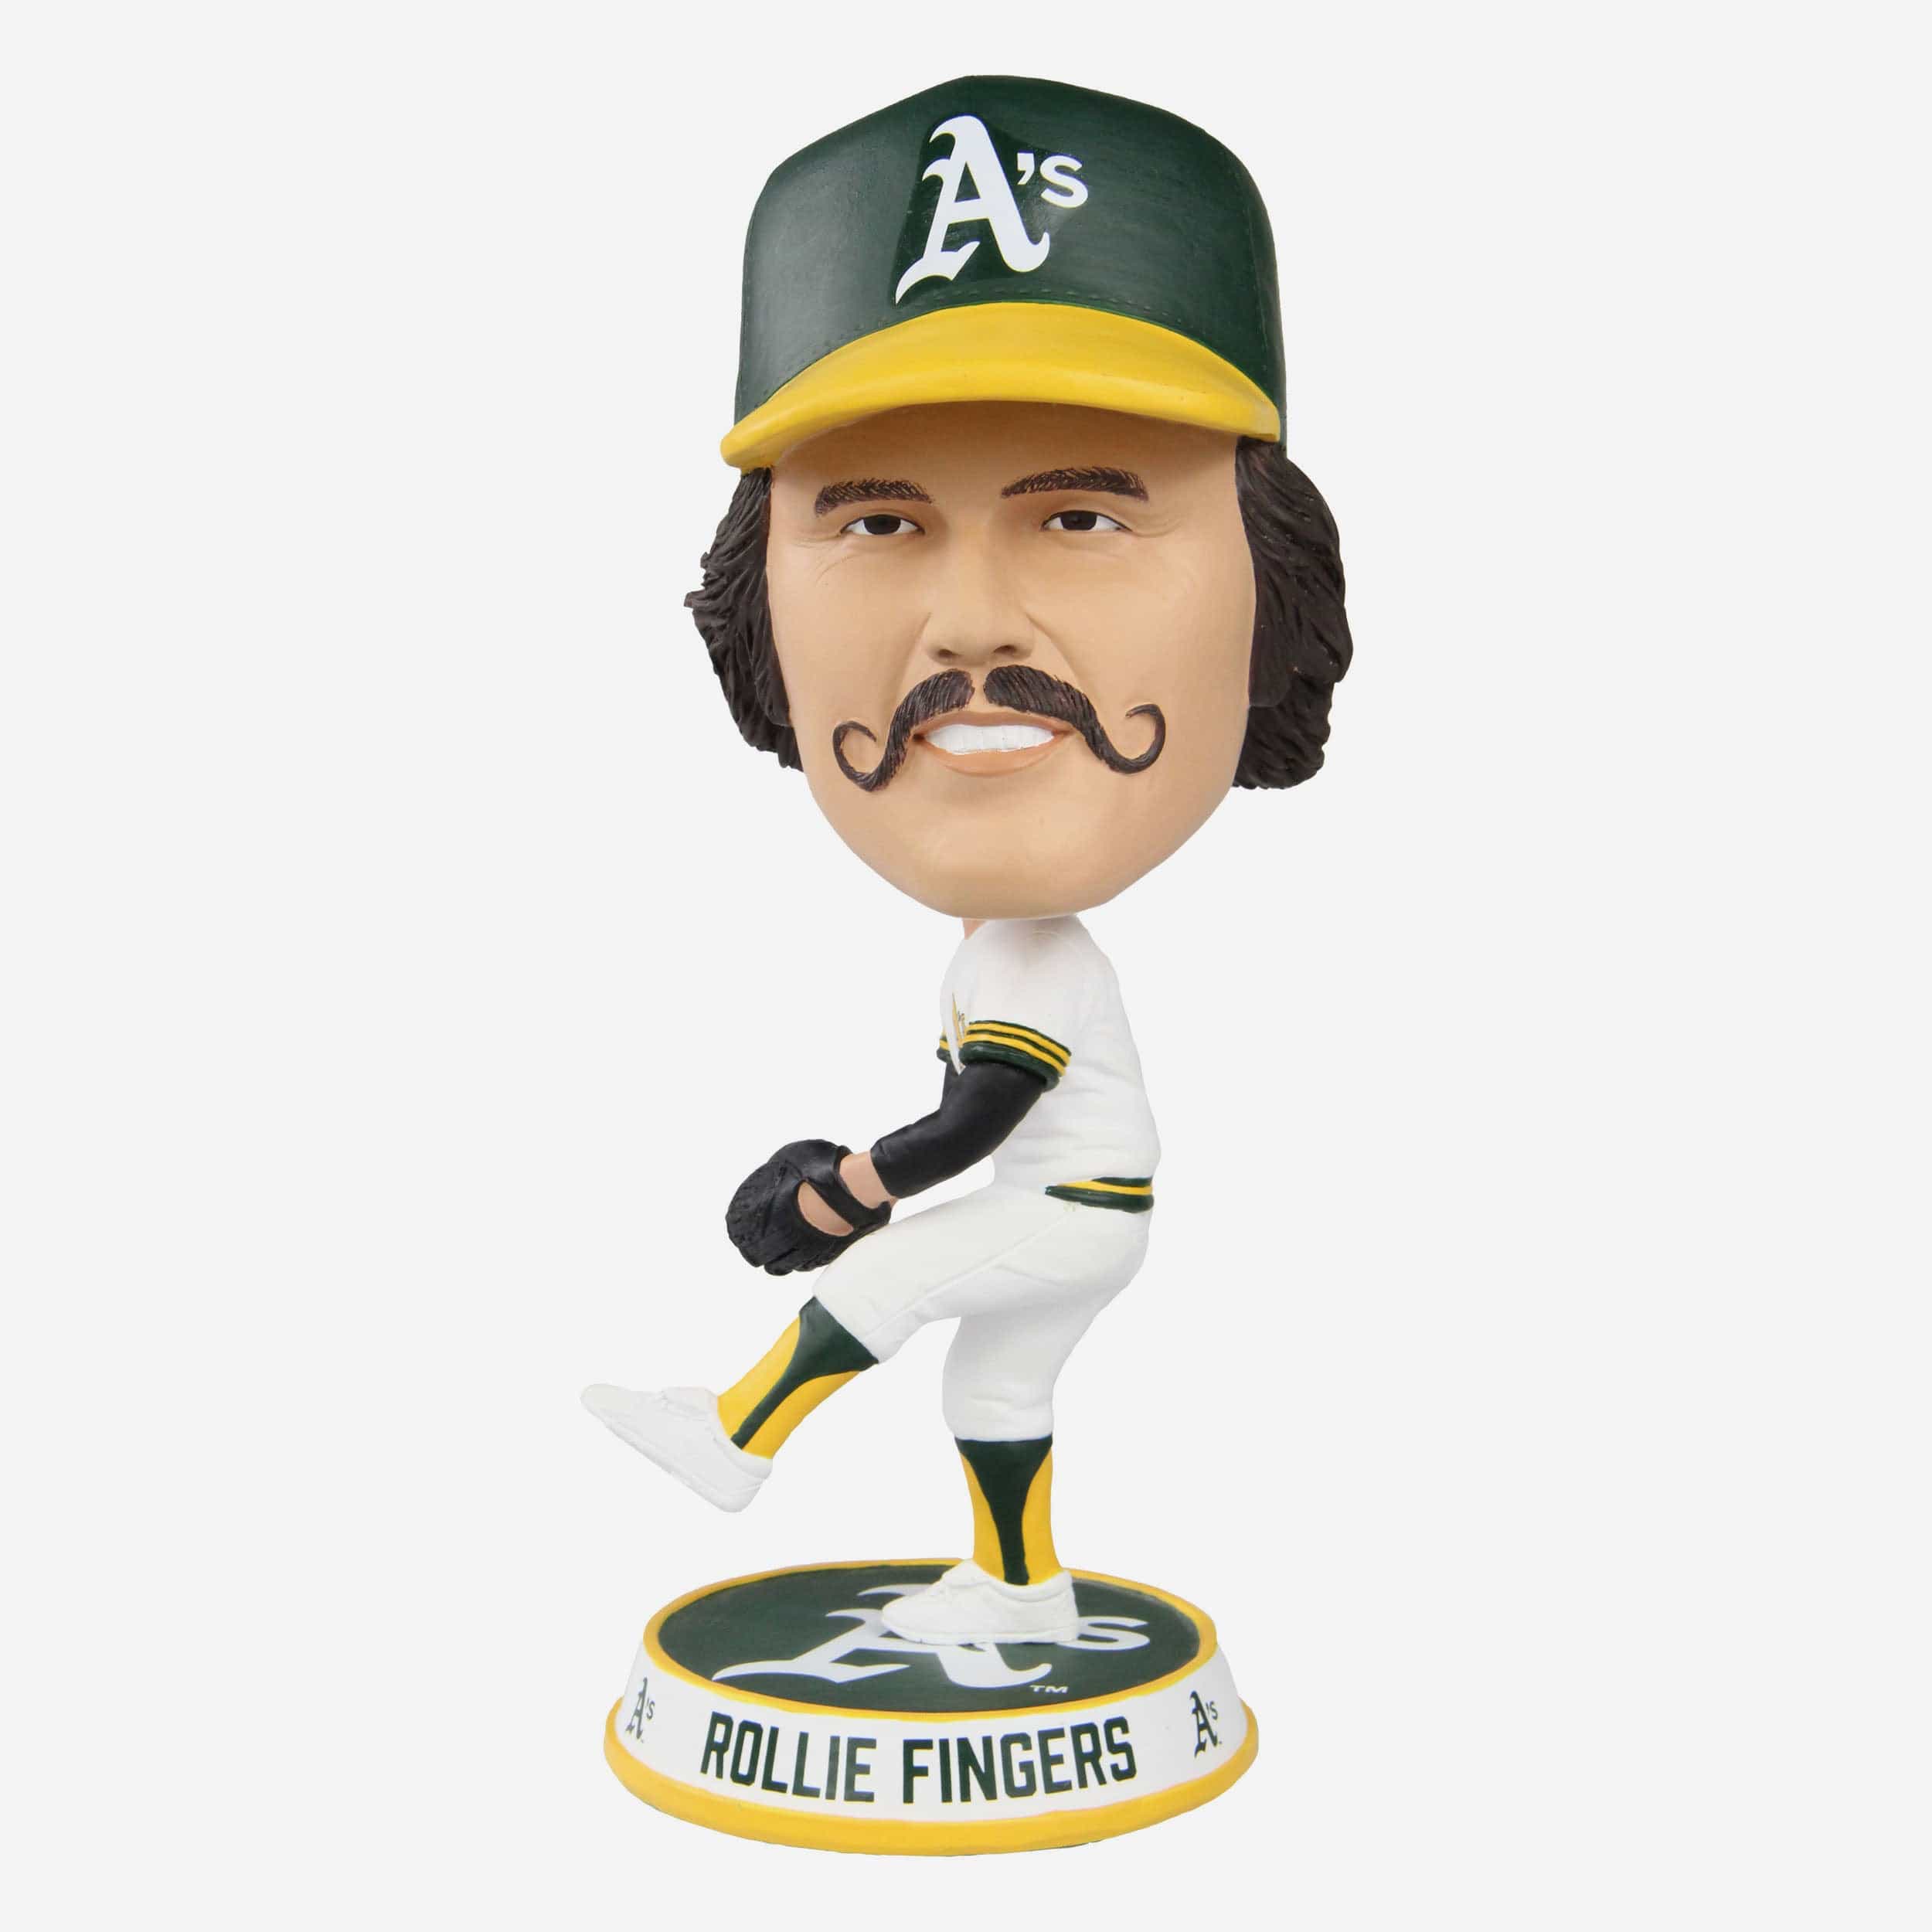 Rollie Fingers Oakland Athletics Bighead Bobblehead Officially Licensed by MLB